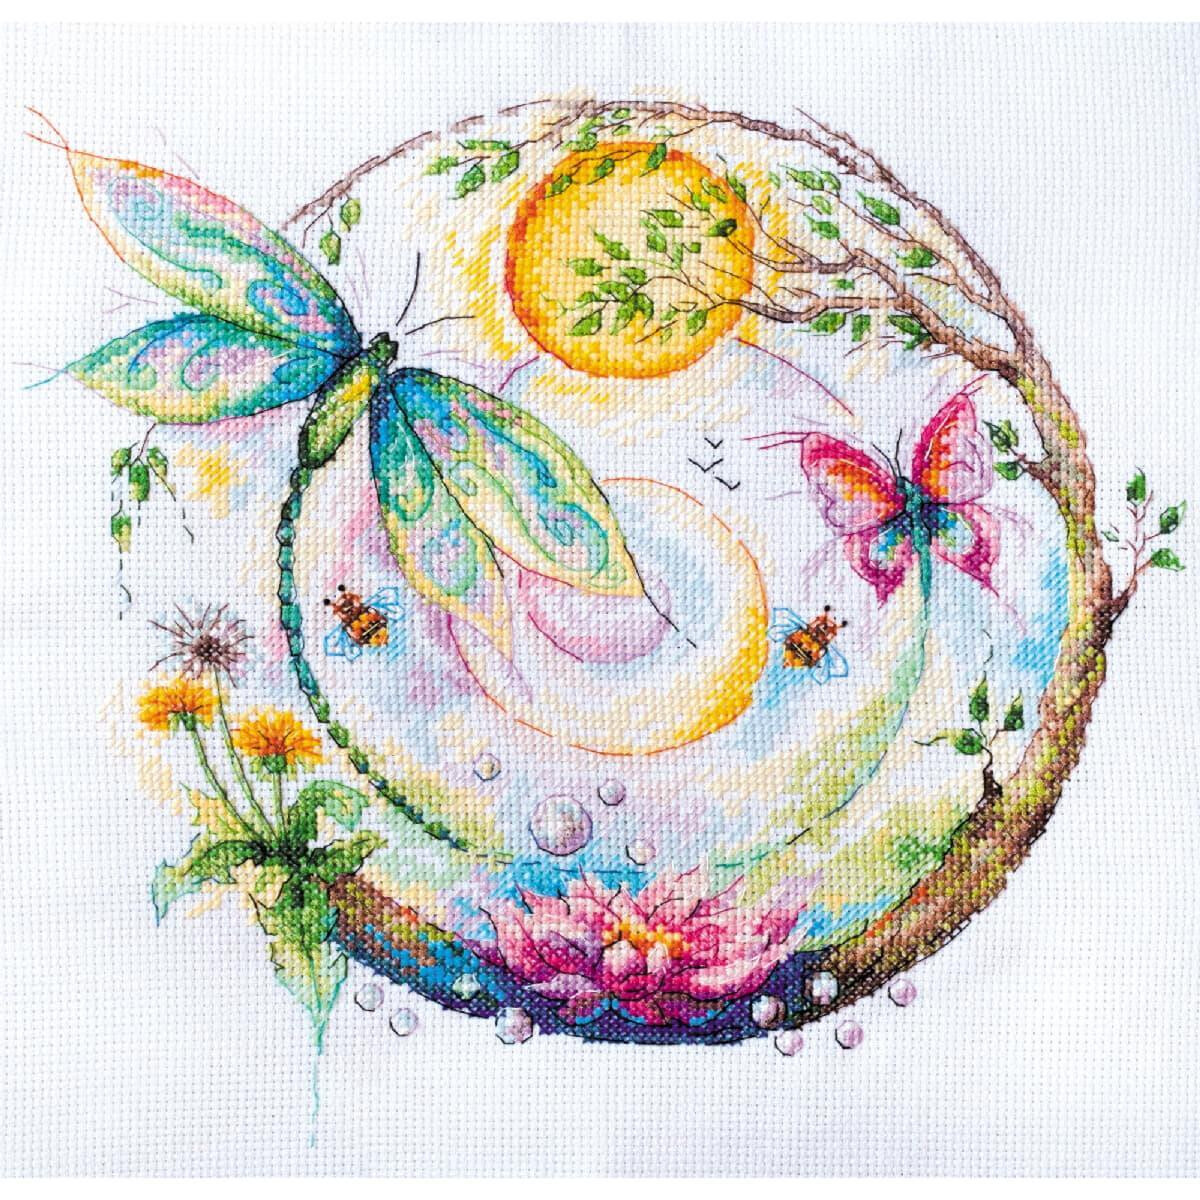 Abris Art counted cross stitch kit "Color...